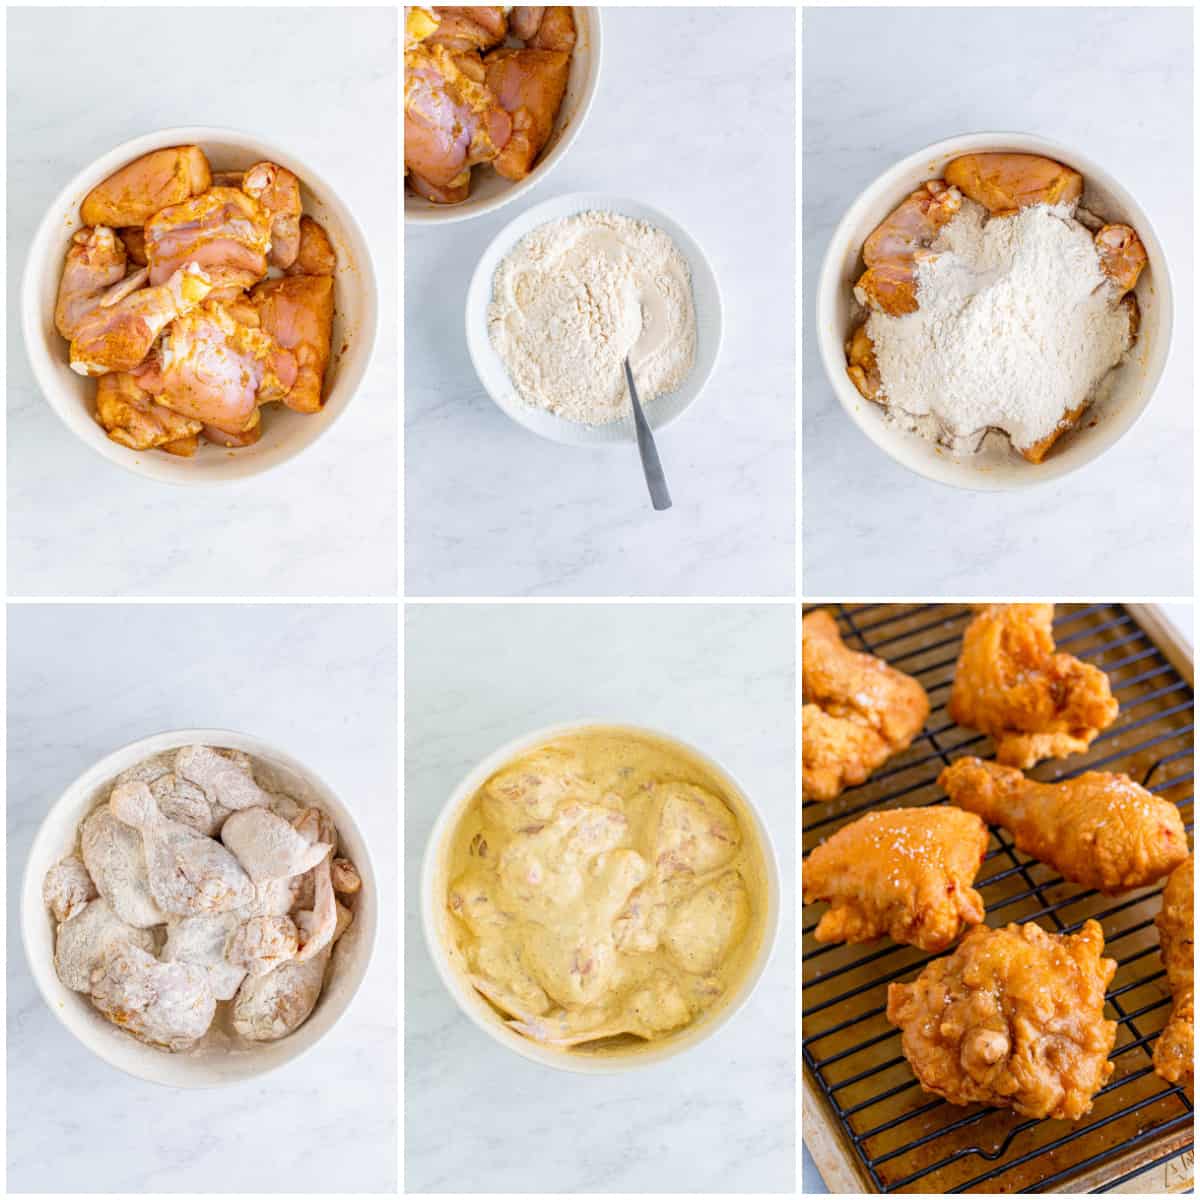 Step by step photos on how to make Grandma's Fried Chicken.